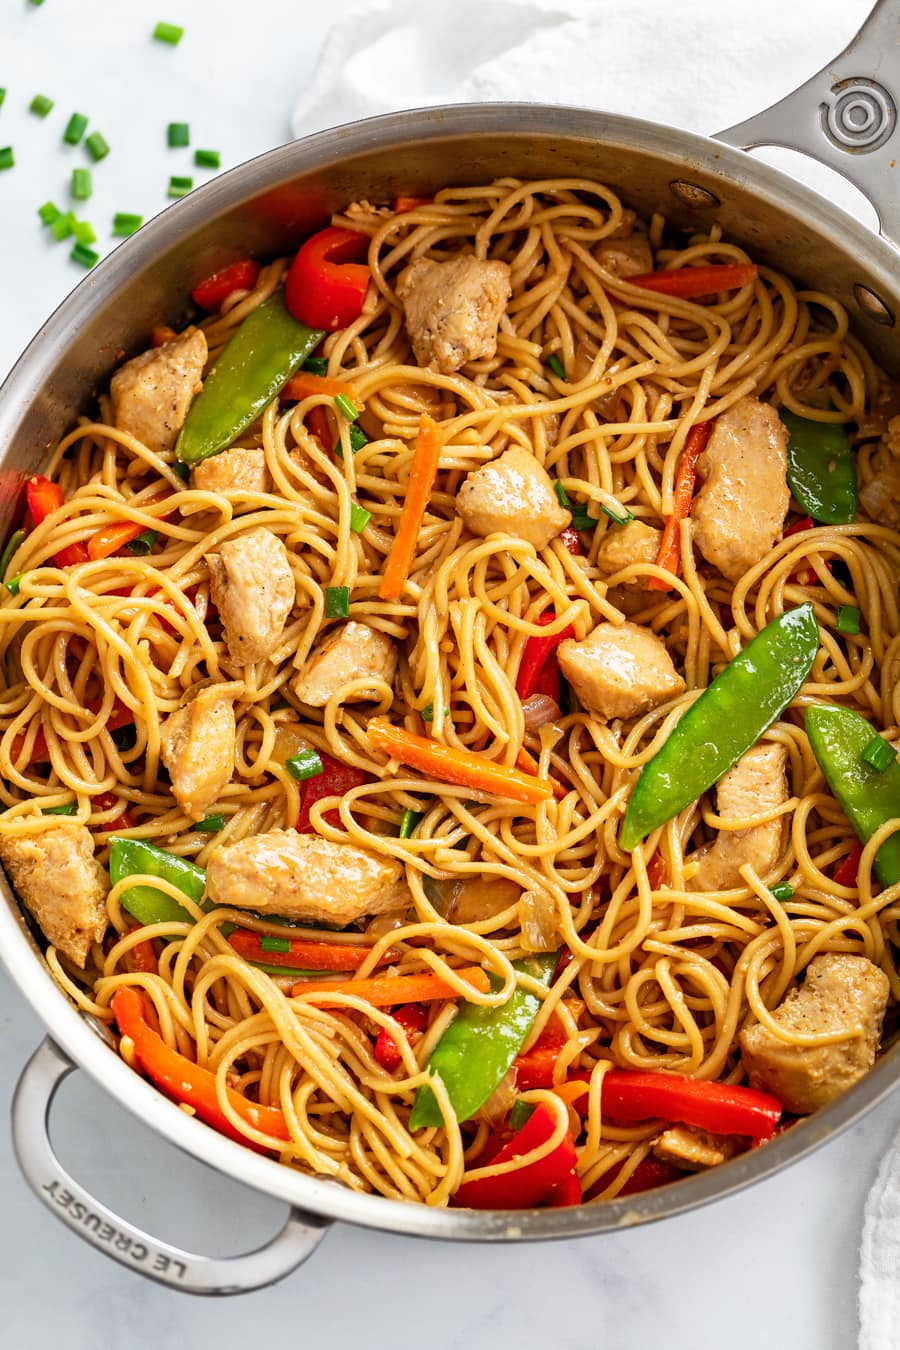 Chicken Lo Mein in a skillet with vegetables and sauce.